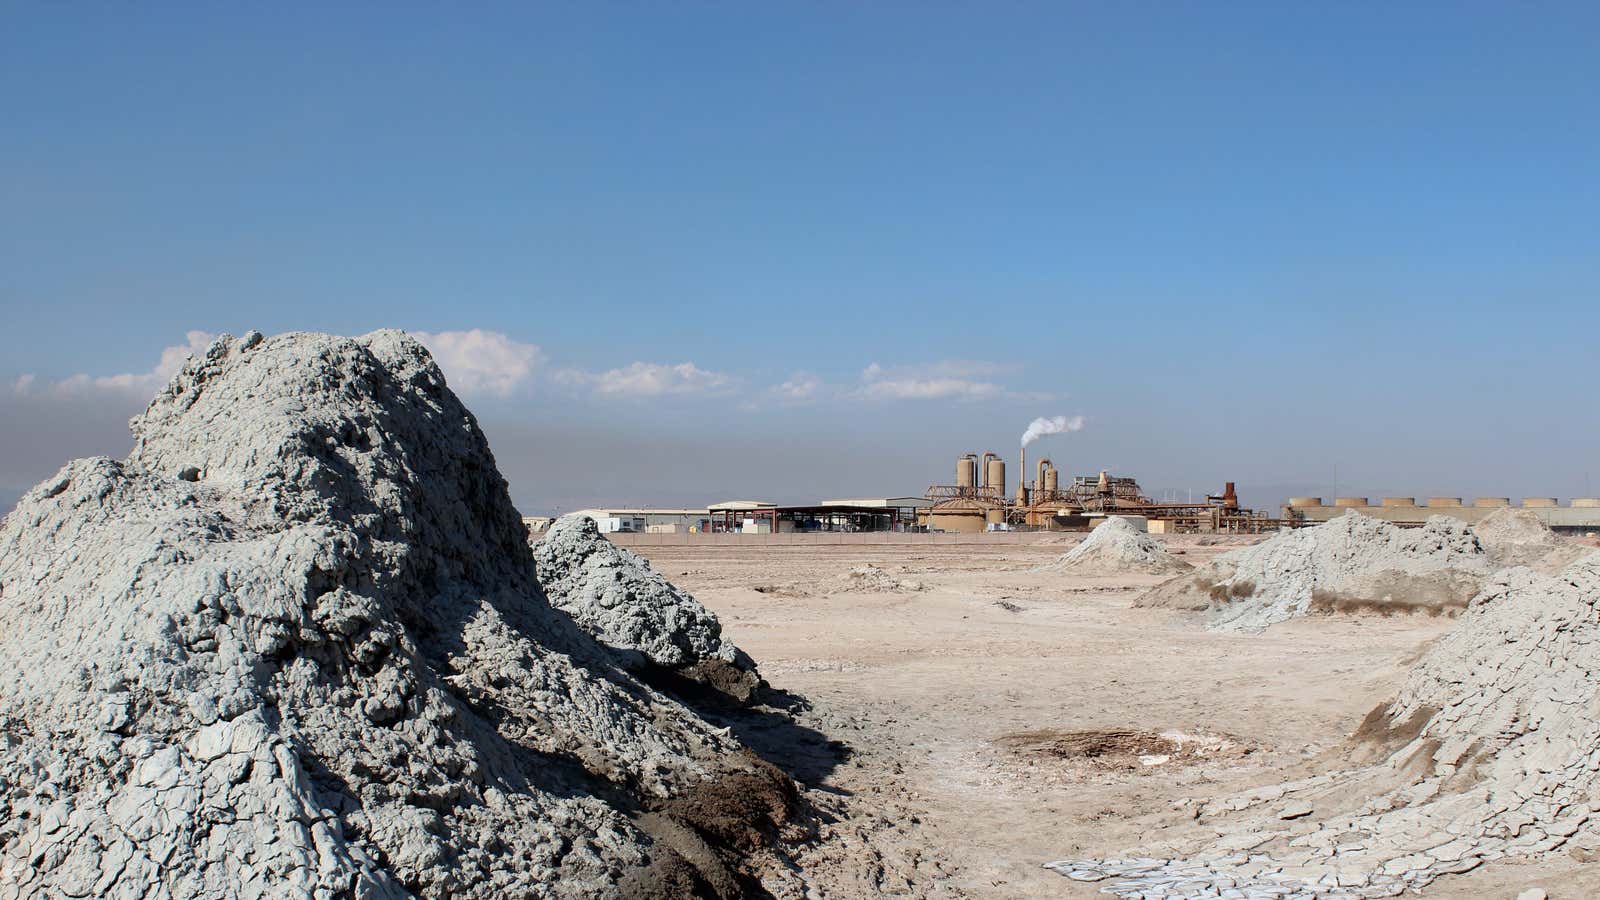 A geothermal plant near the Salton Sea in Southern California